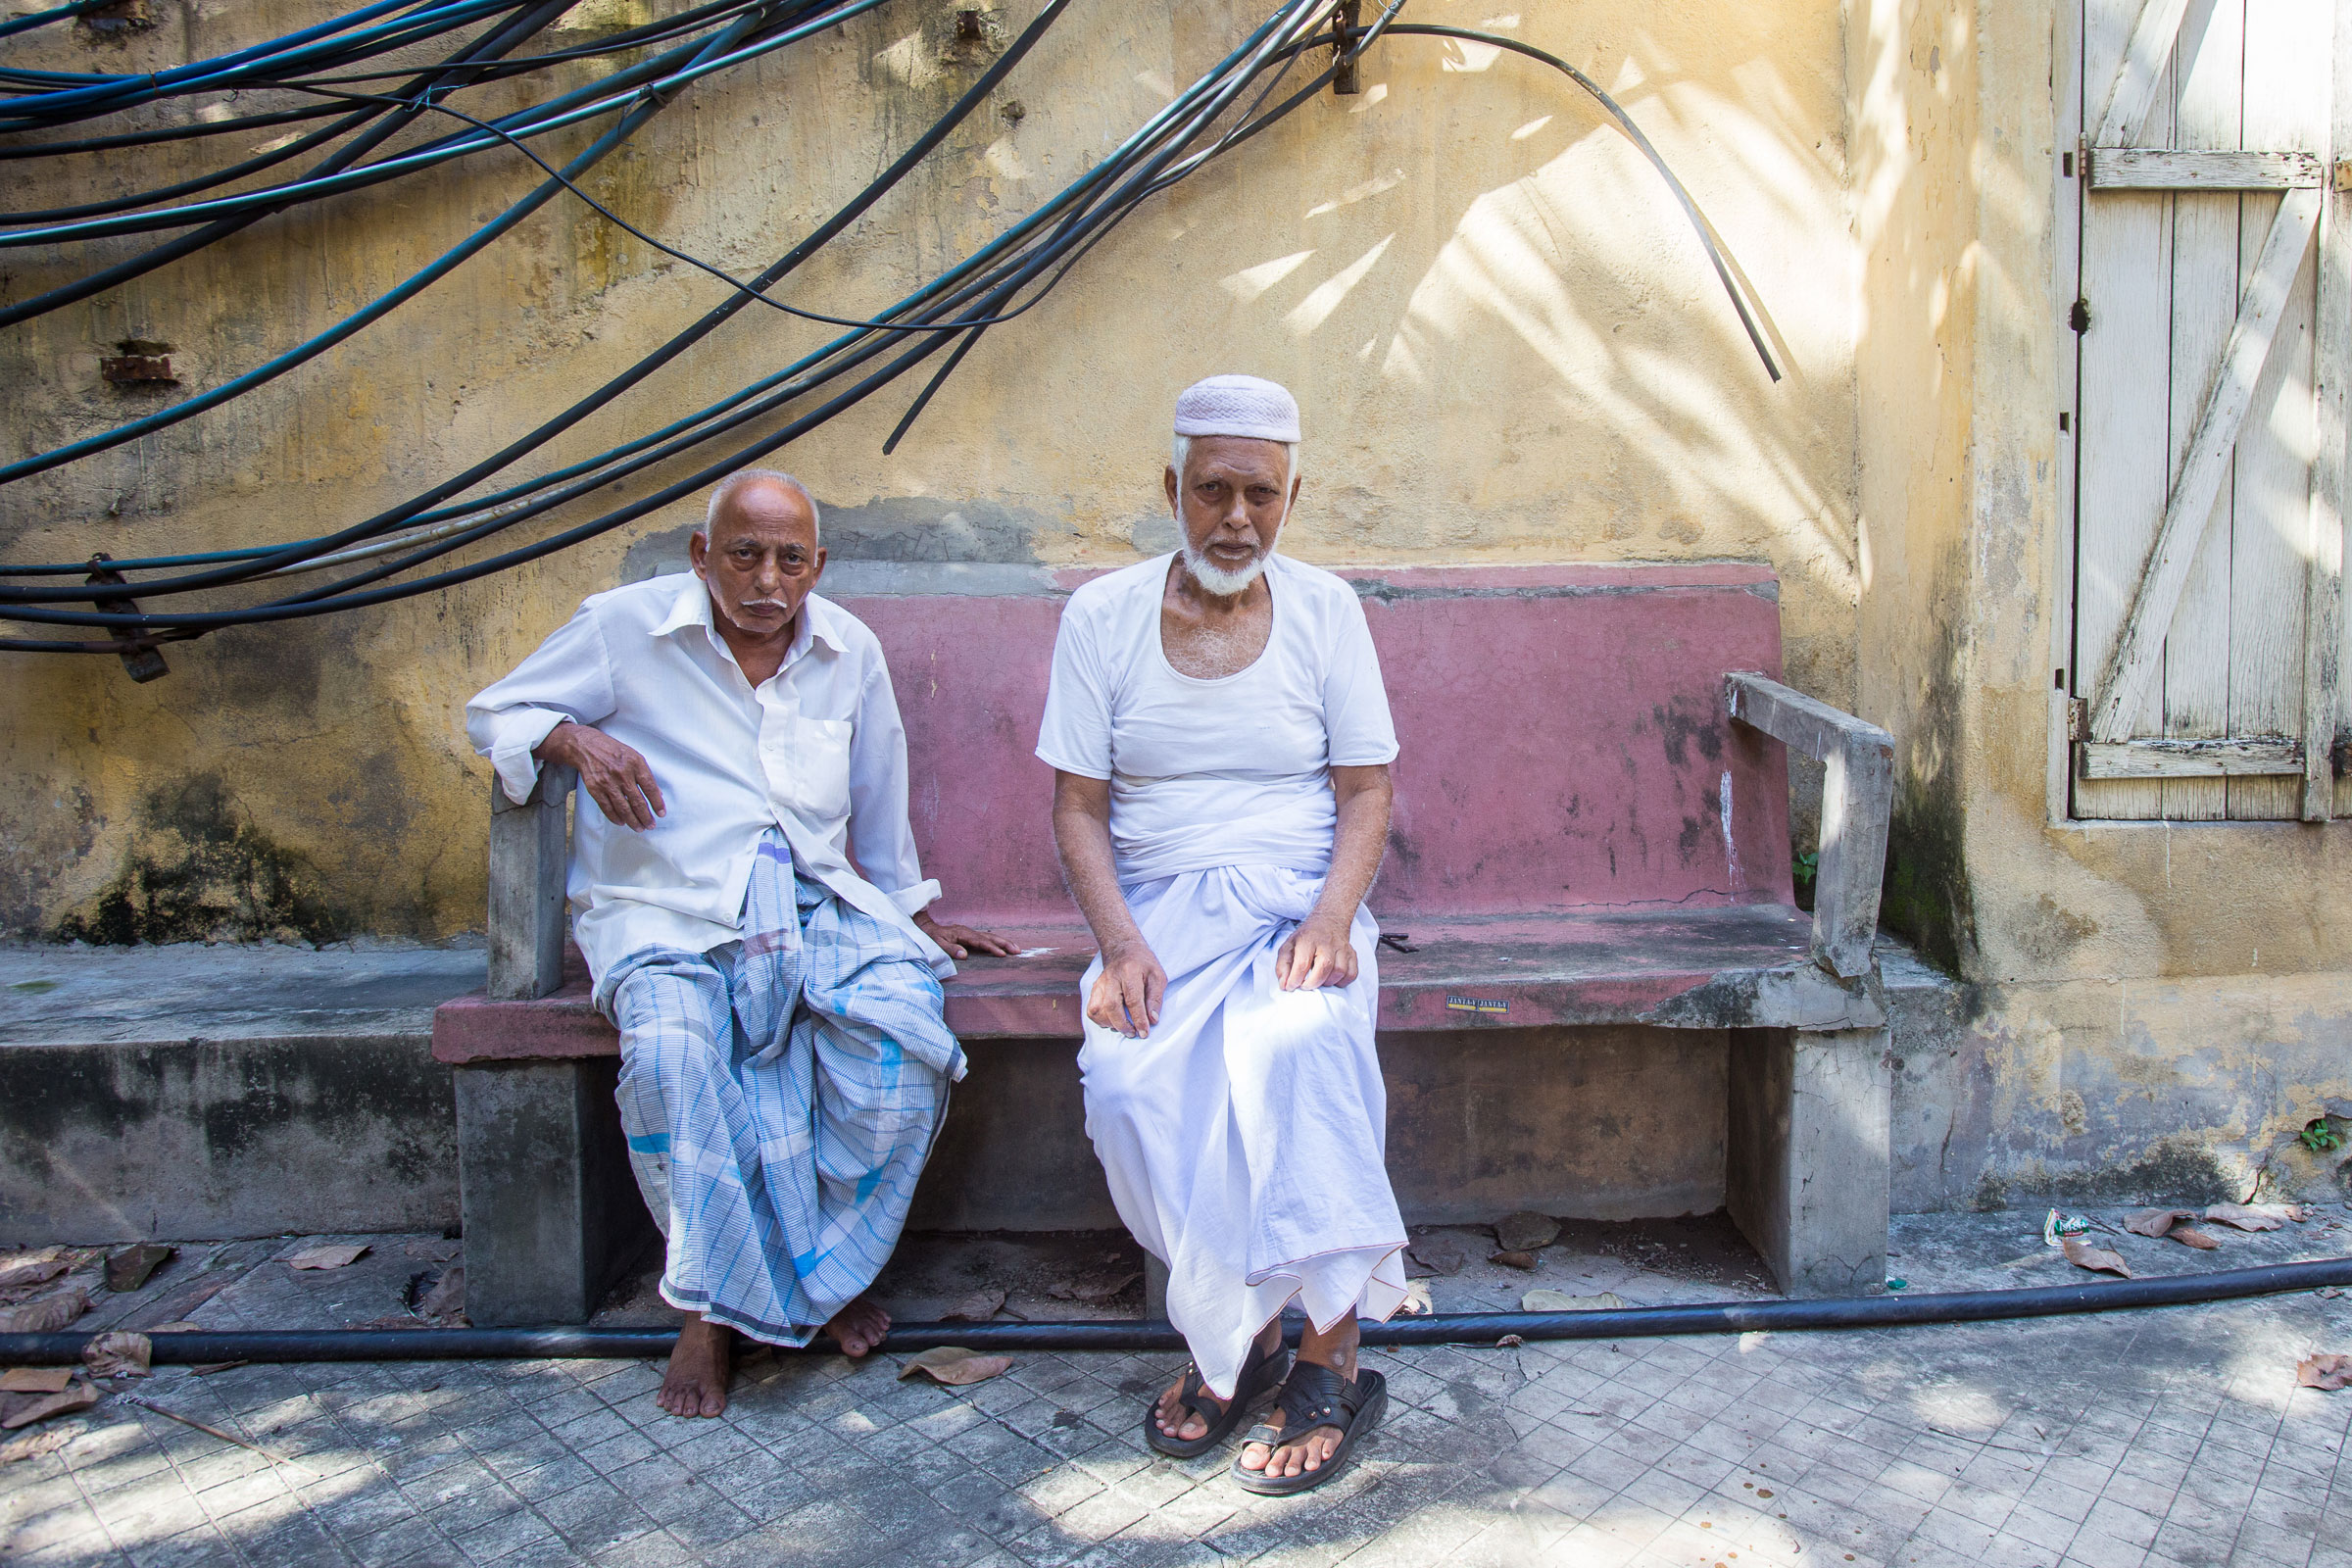 (Left to Right) Khalil Khan and Sheikh Nassir, two of the Muslim caretakers at the Beth El Synagogue.